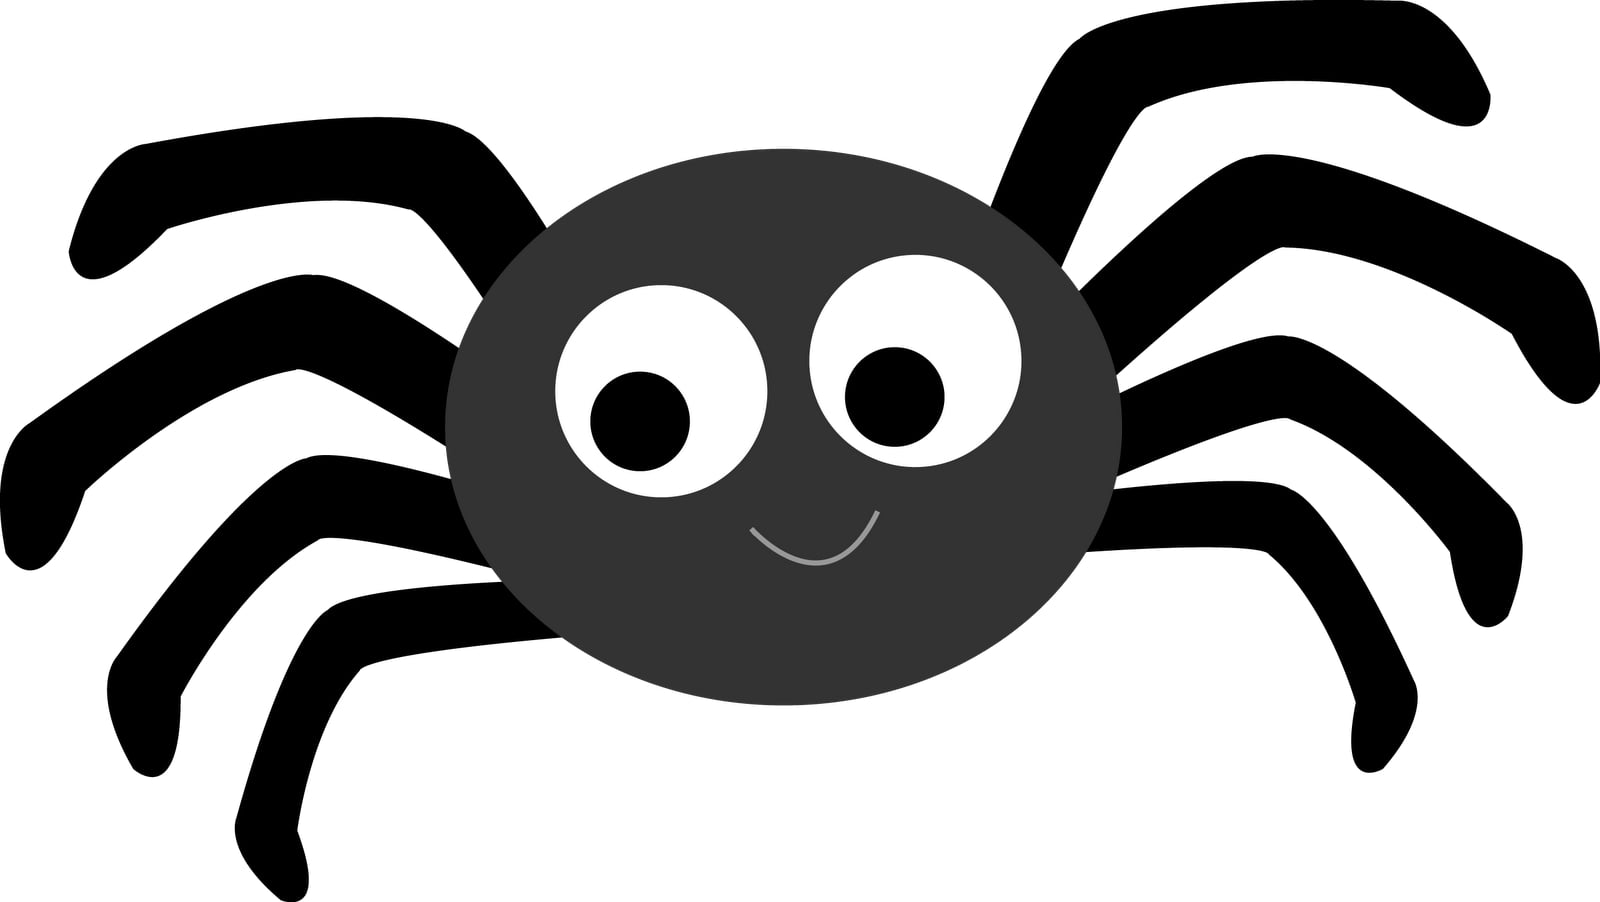 Printable Spider Template_12954